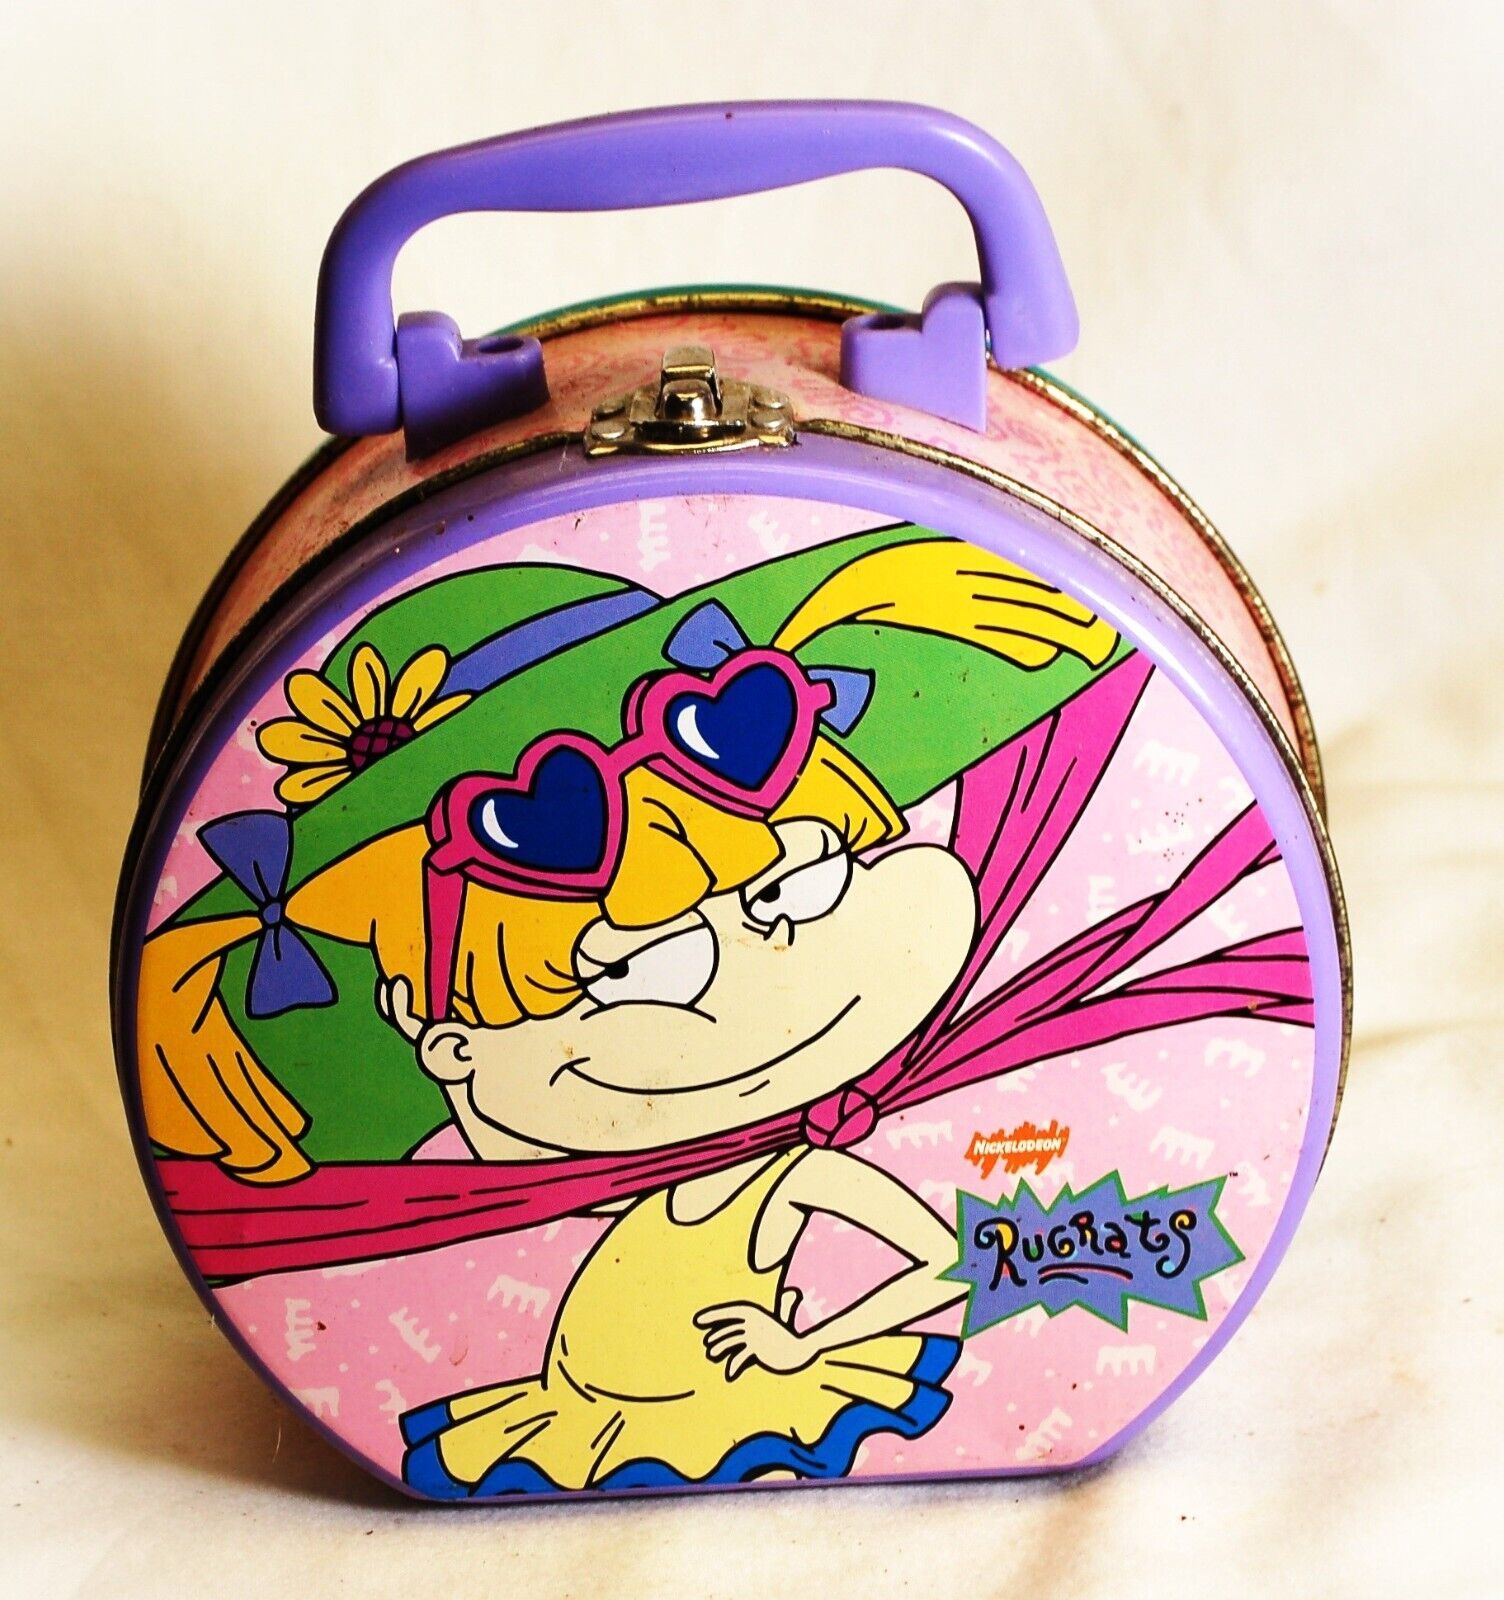 Nickelodeon Rugrats Pink Metal Lunchbox and 50 similar items